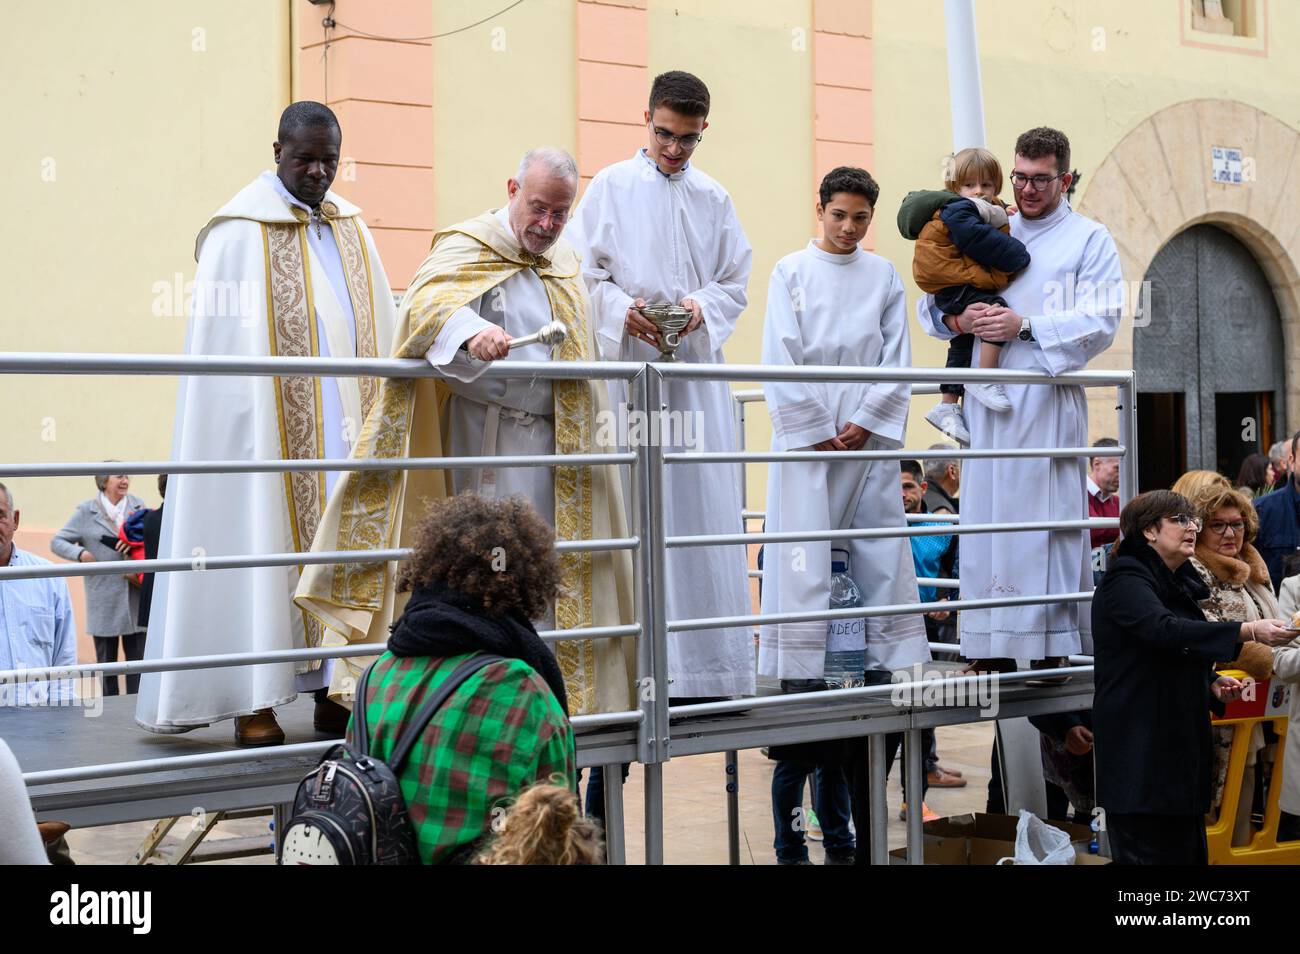 Celebration of St. Anthony's Day with the blessing of the animals by the priests in the street in front of the church, in Alginet, Valencia, Spain Stock Photo